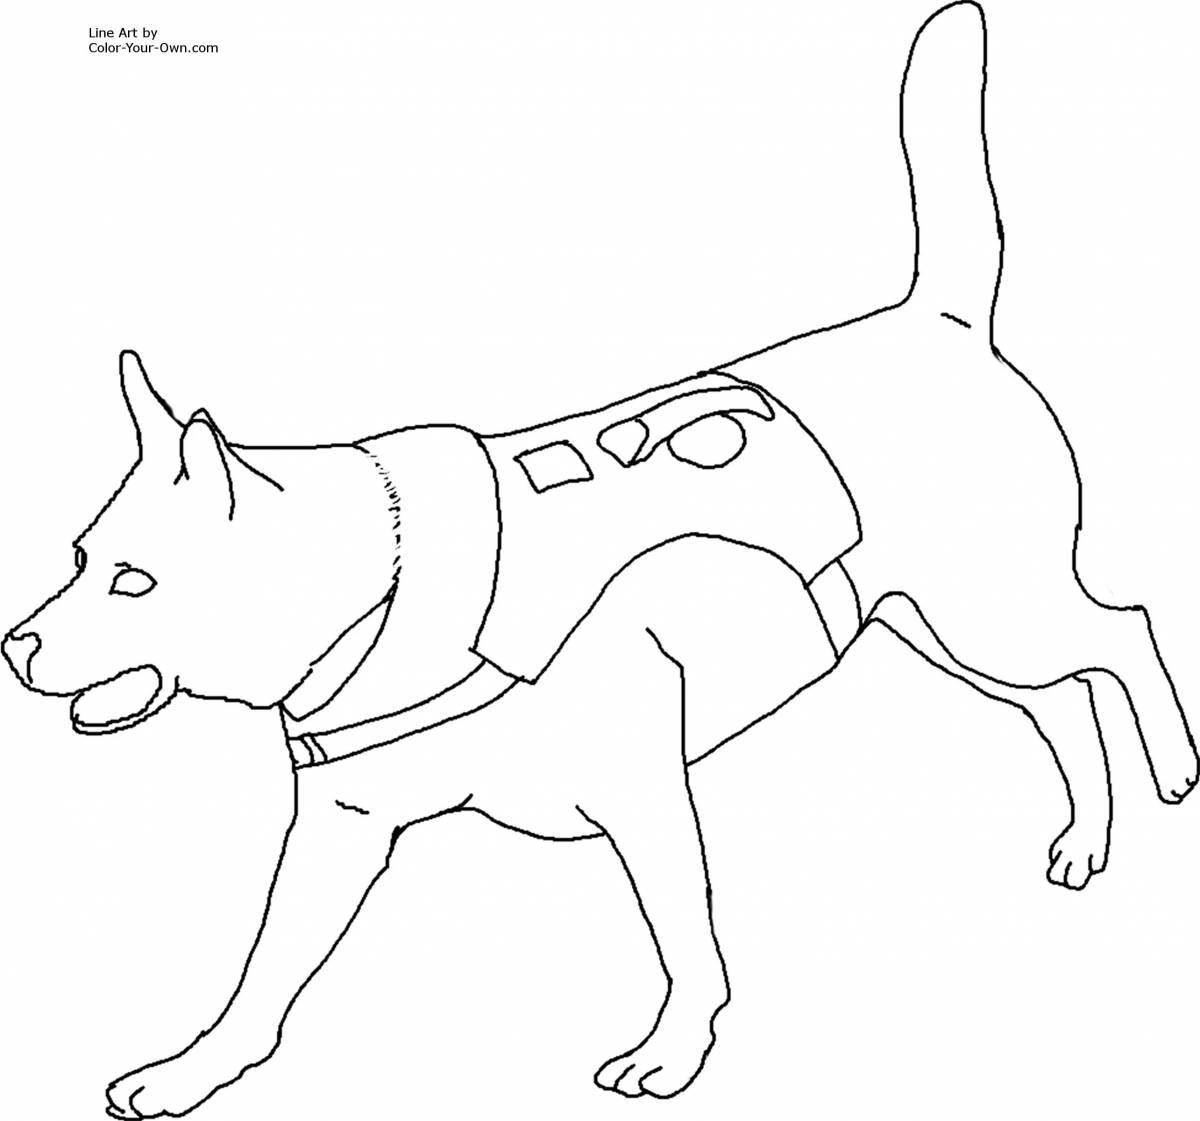 Ferocious police dog coloring page